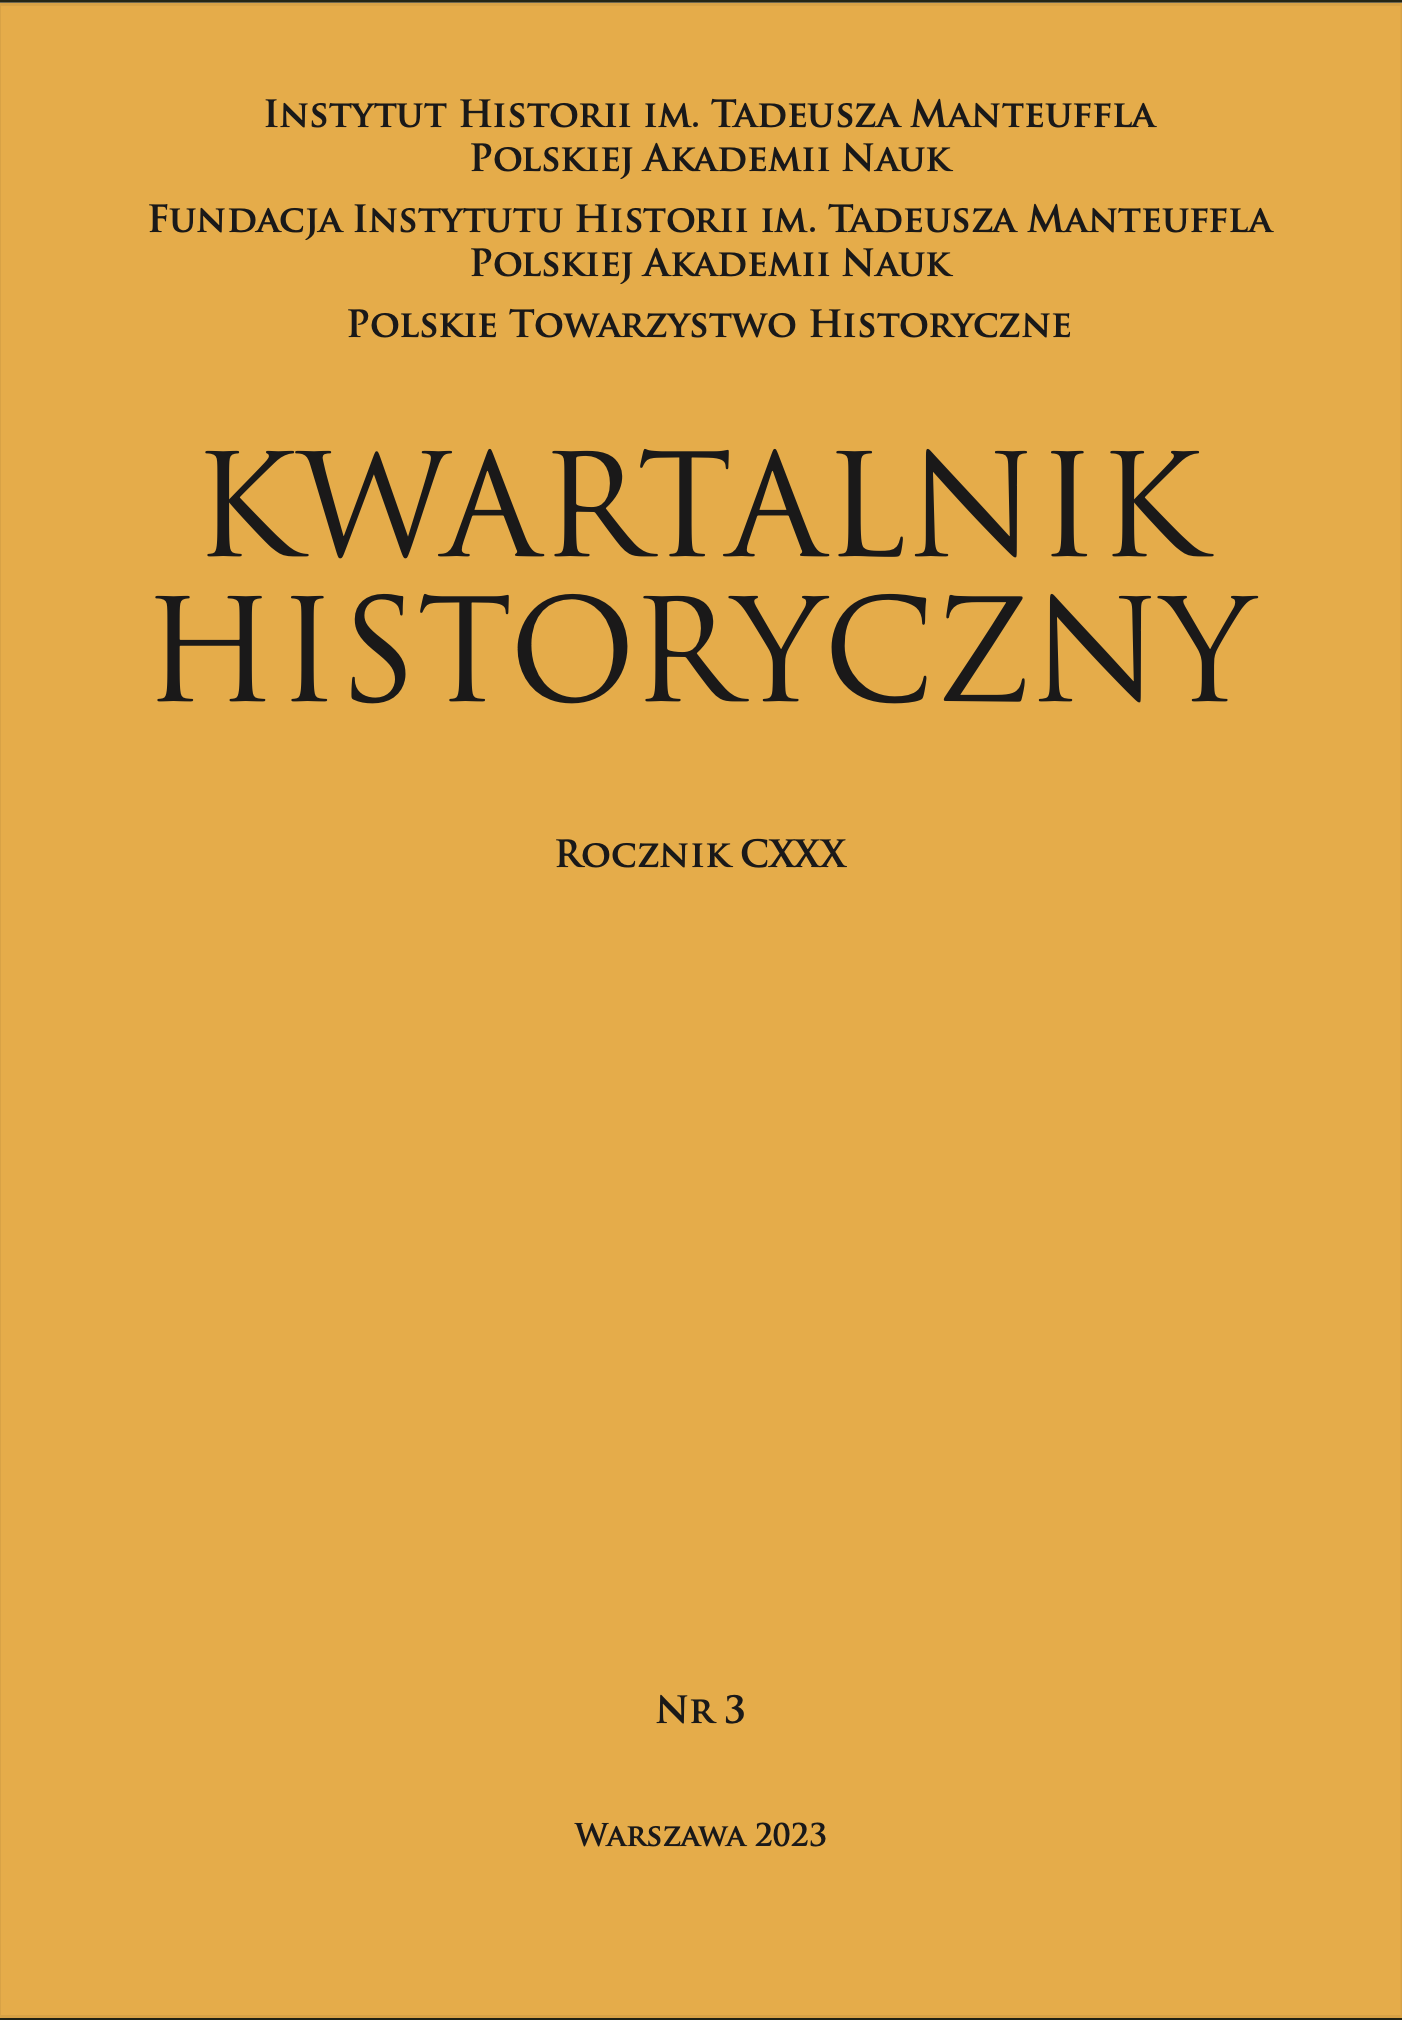 RESEARCH ON THE HISTORY OF PIETISM
IN THE LATE SEVENTEENTH AND EARLY EIGHTEENTH CENTURIES. COMMENTS ON THE MONOGRAPH BY LILIANA LEWANDOWSKA Cover Image